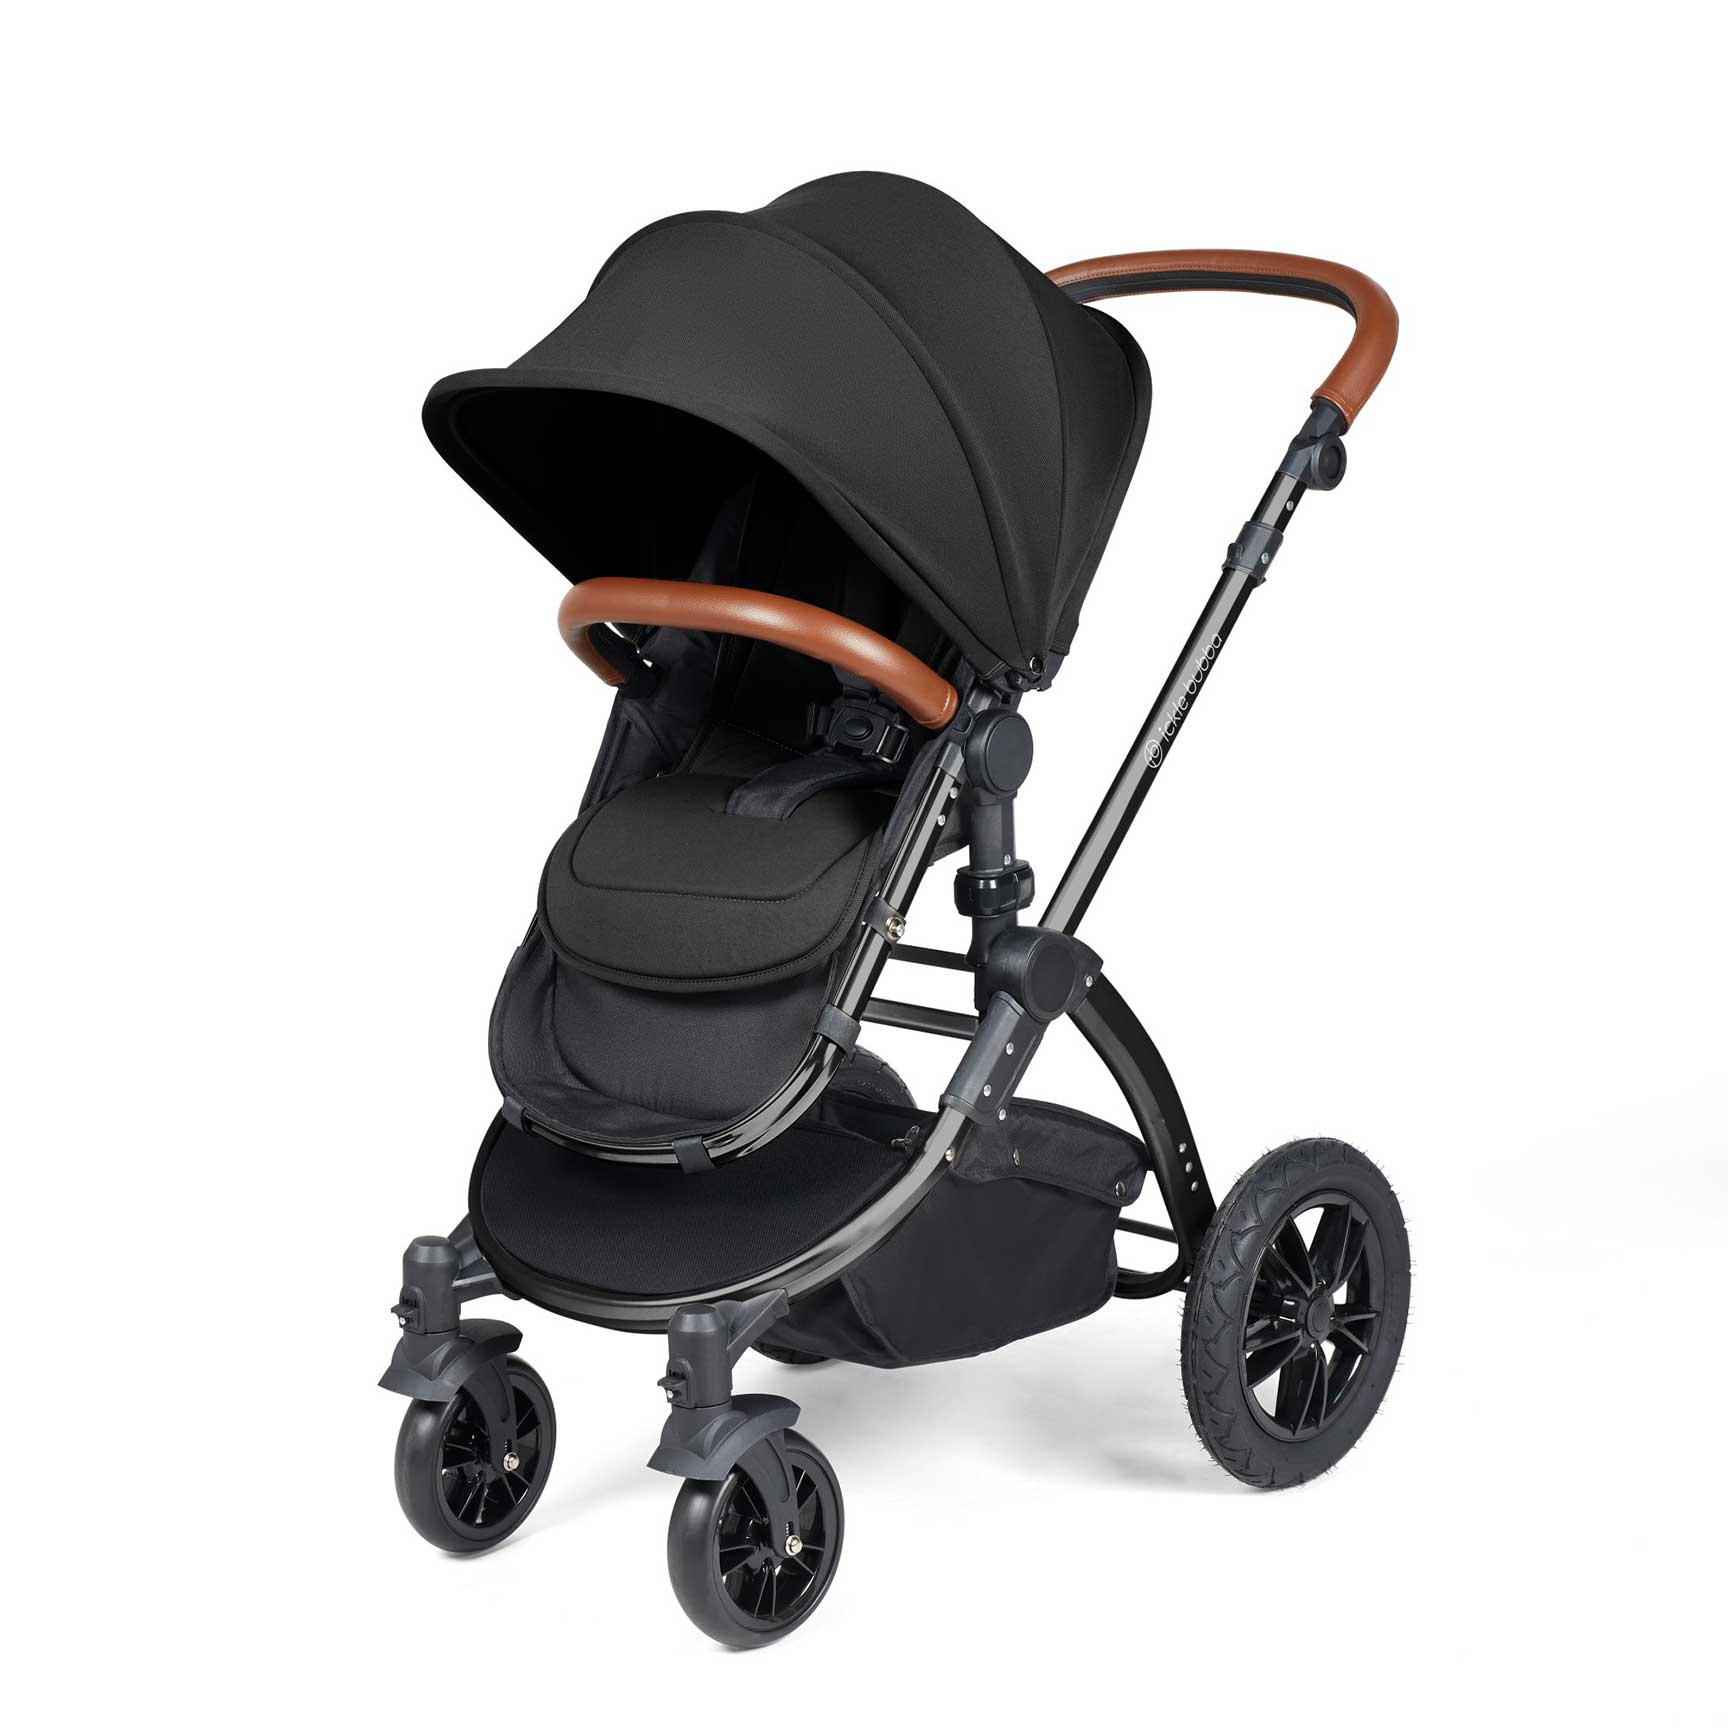 Ickle Bubba travel systems Ickle Bubba Stomp Luxe 2 in 1 Plus Pushchair & Carrycot - Black/Midnight/Tan 10-003-001-203